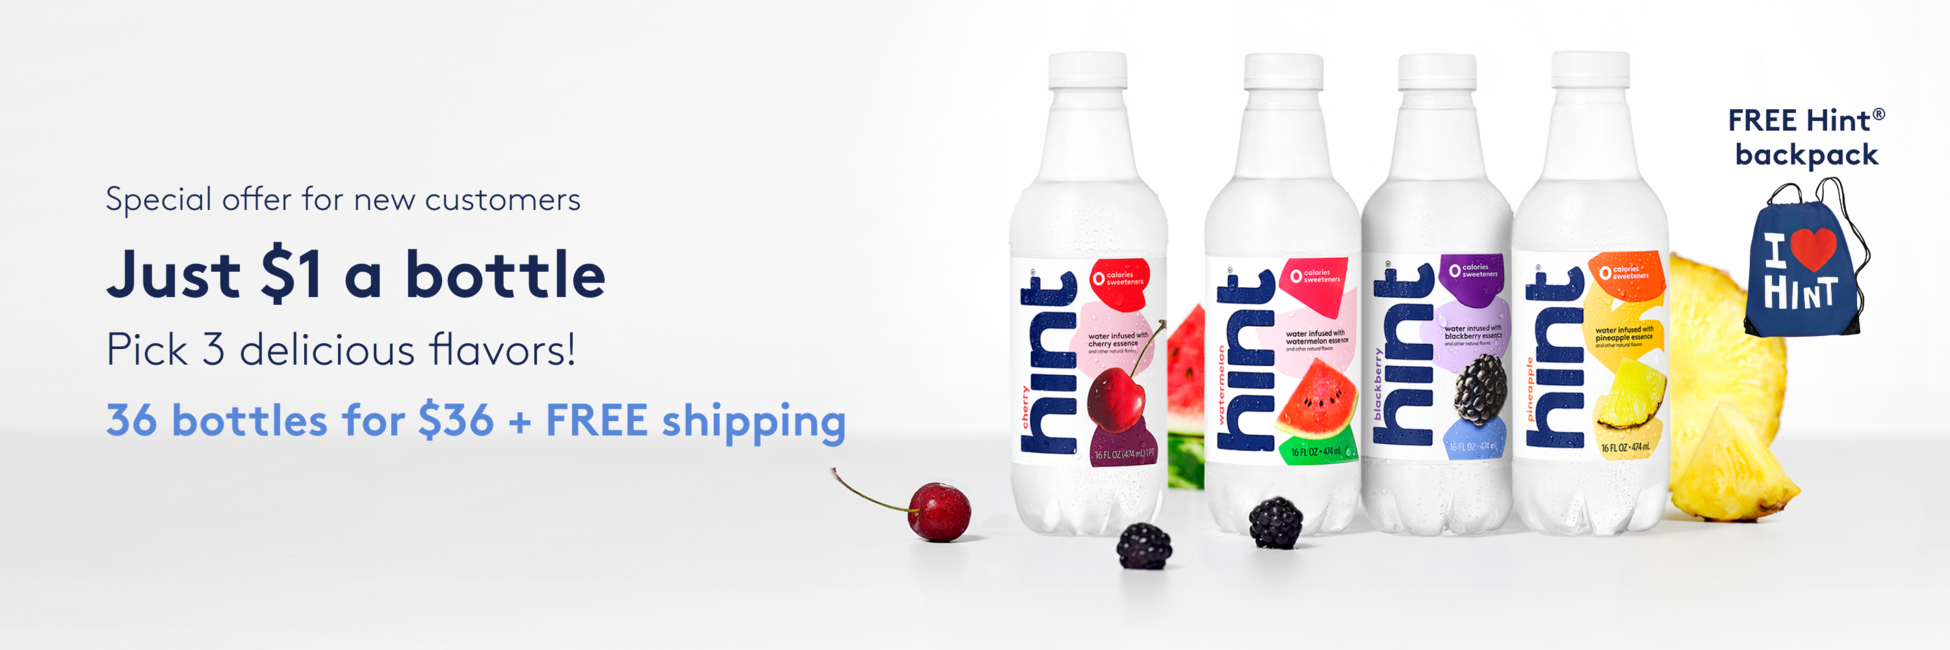 DRINKHINT: New customers get 40% off + FREE shipping